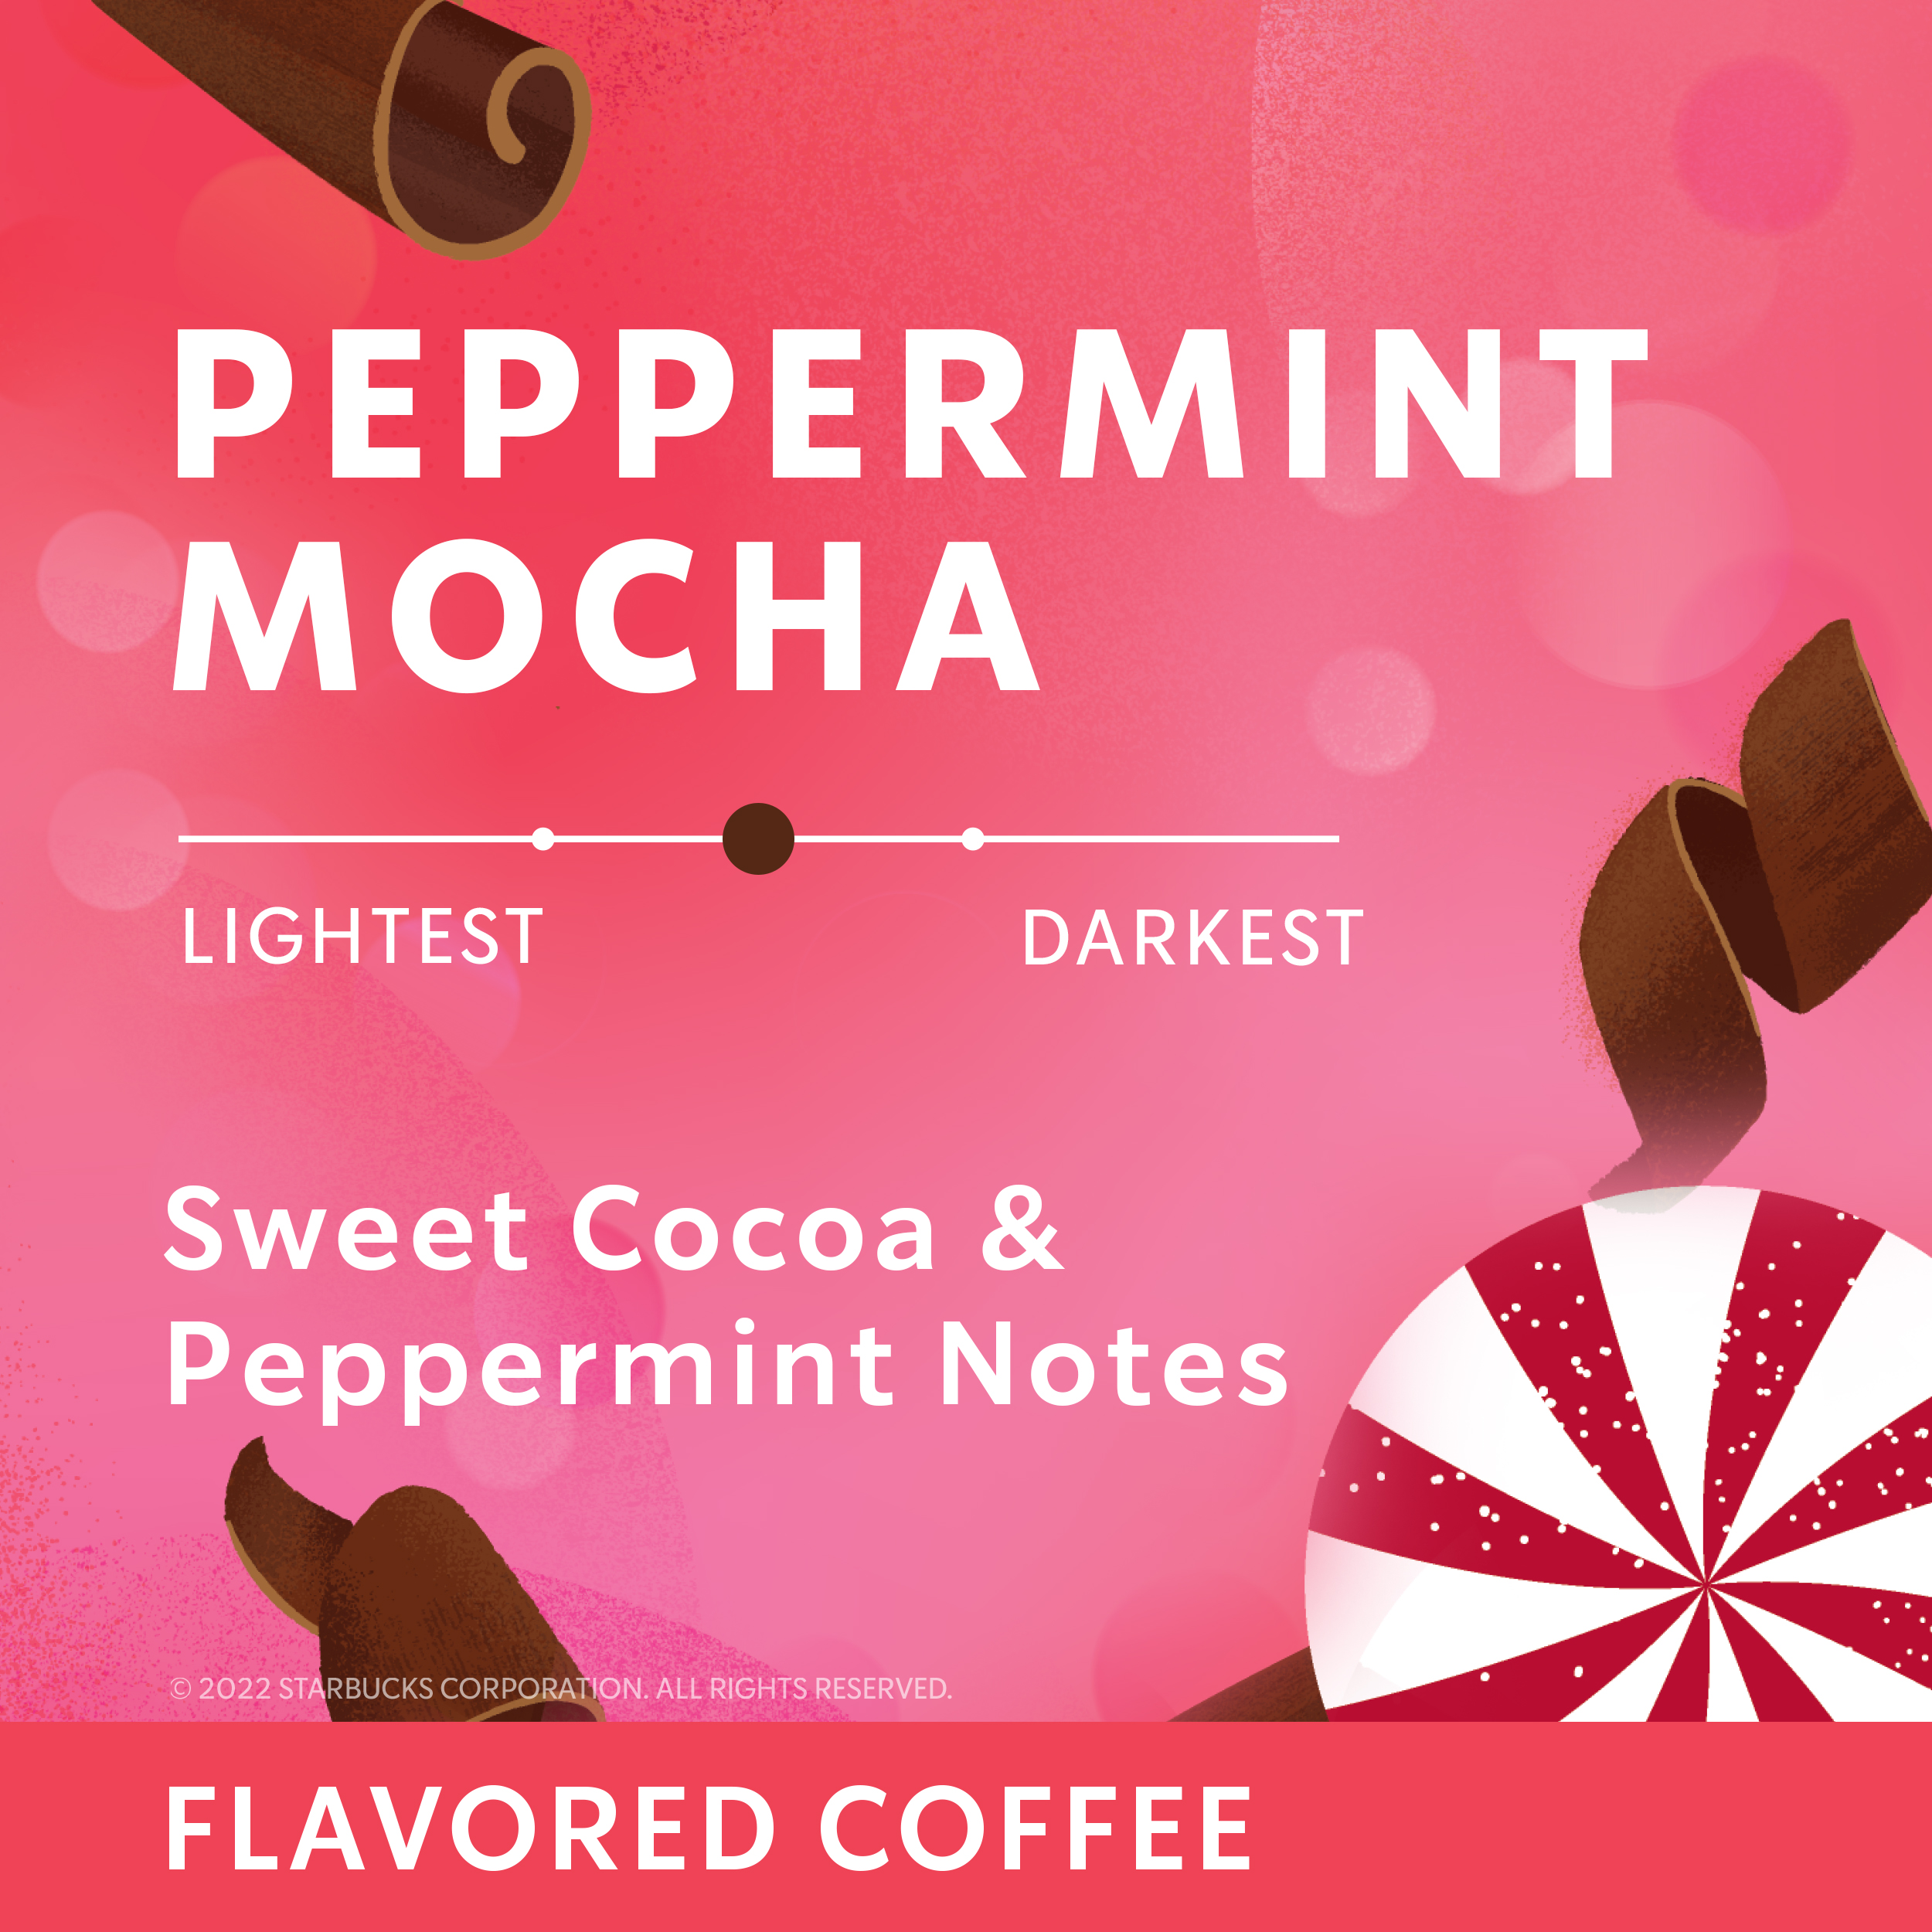 Starbucks Peppermint Mocha Flavored Ground Coffee, 100% Arabica, Naturally Flavored, Limited Edition, 11 oz - image 4 of 7